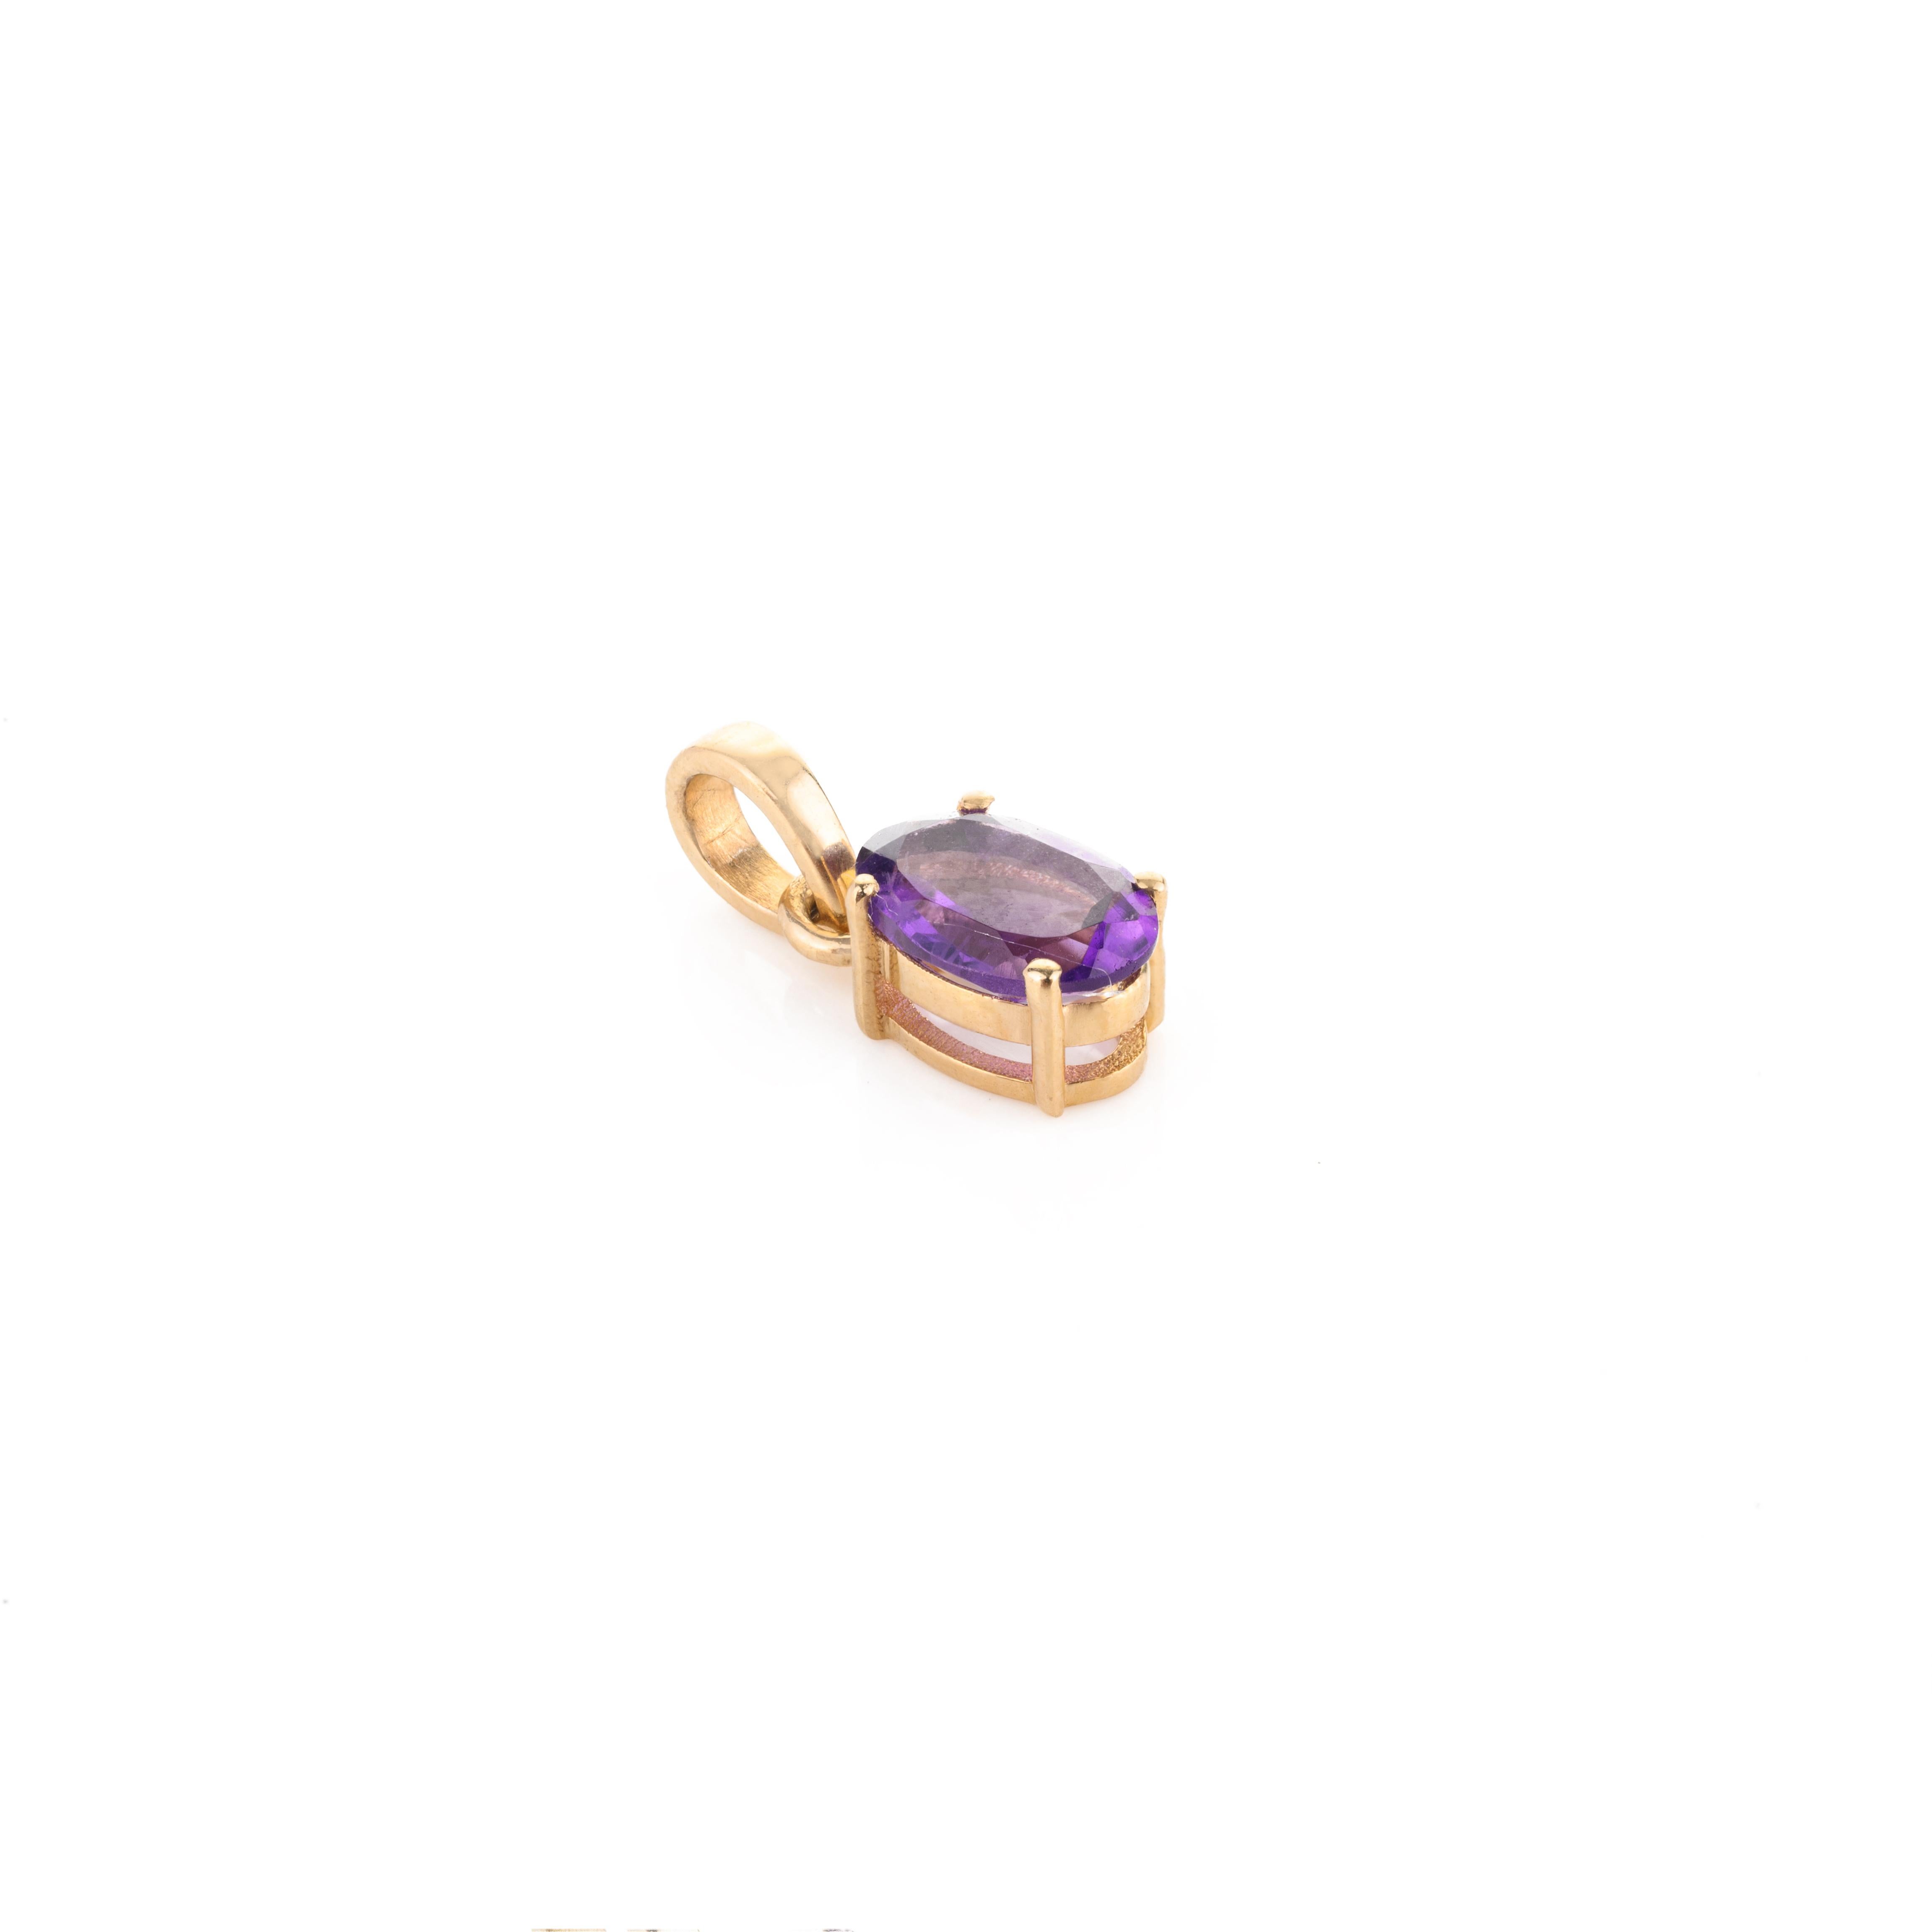 For Sale:  18k Solid Yellow Gold Amethyst Ring, Pendant and Earring Jewelry Set Gift 5